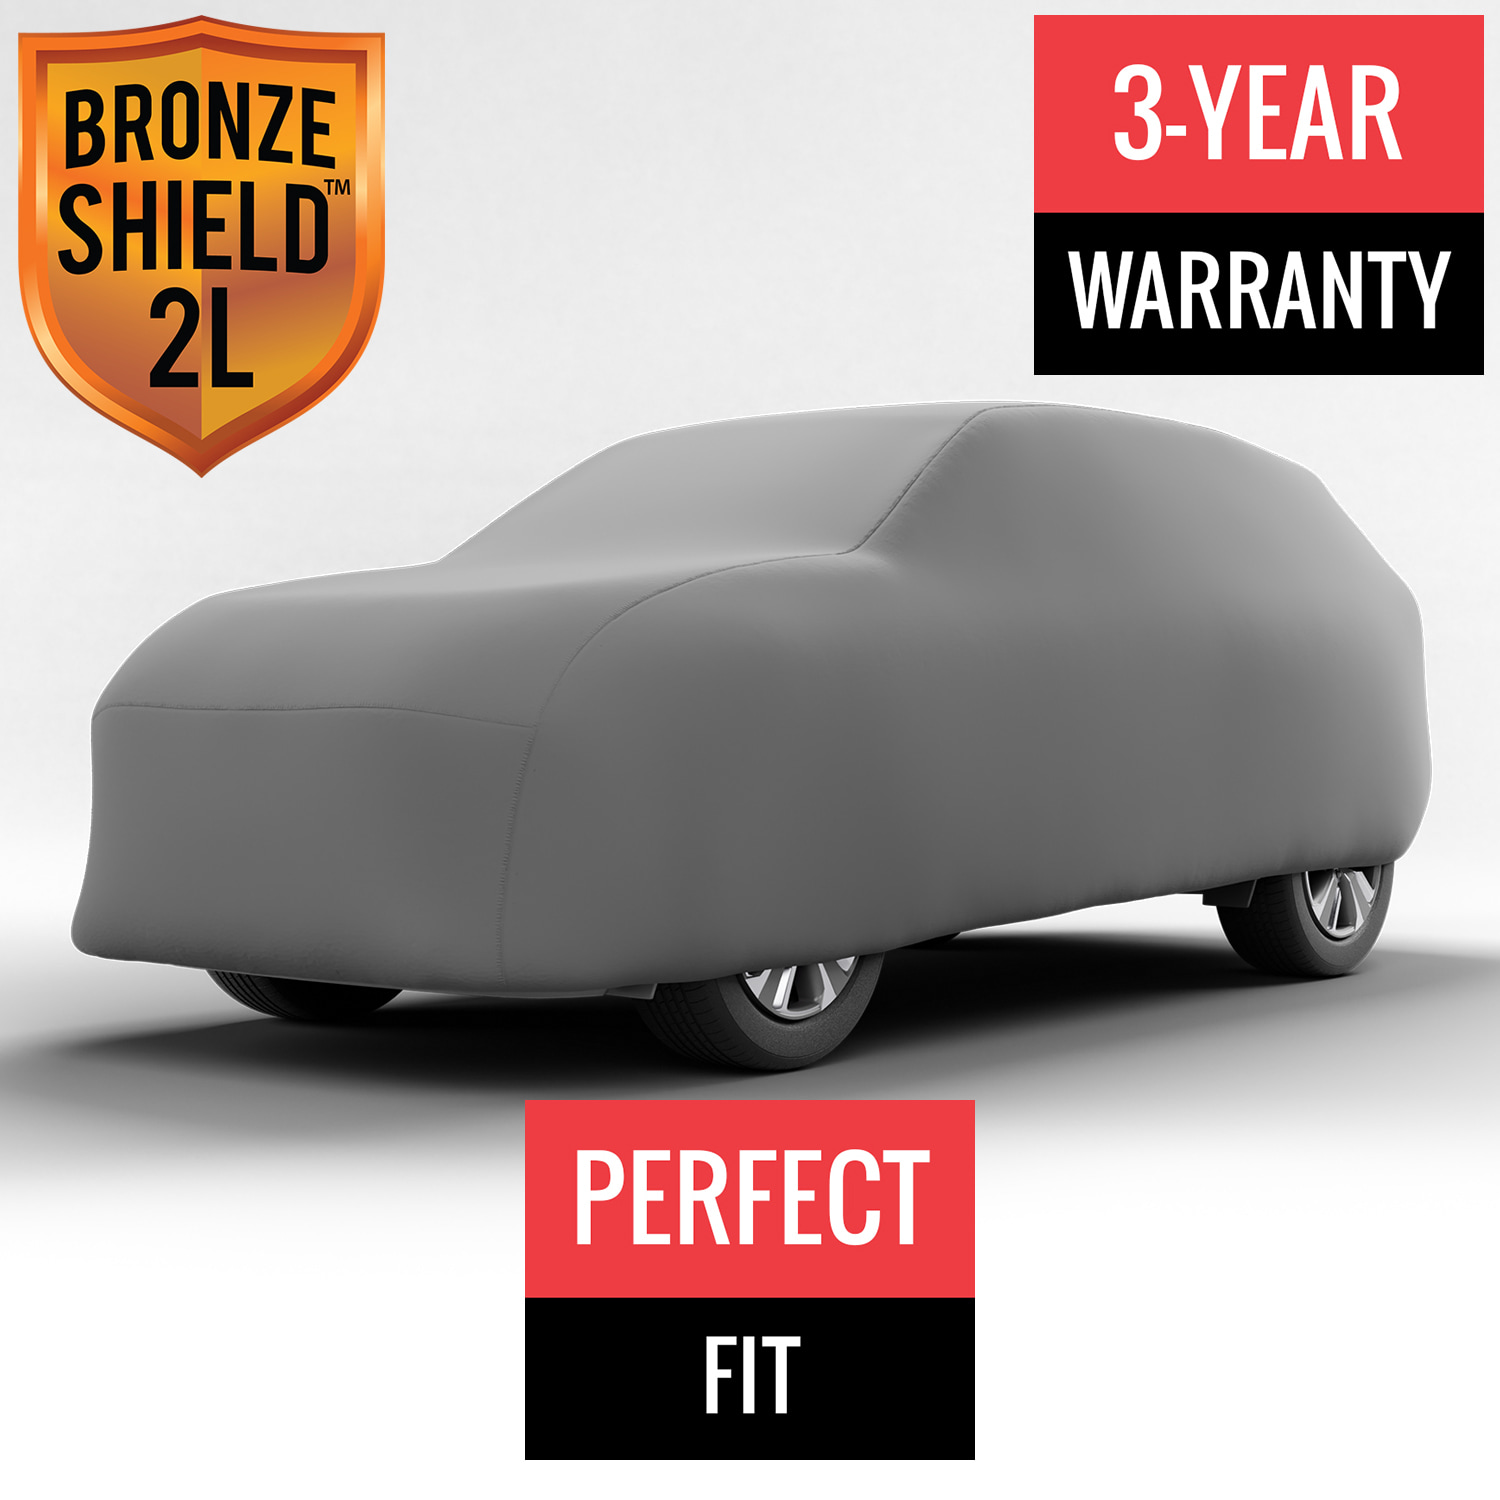 Bronze Shield 2L - Car Cover for Ford Bronco 2020 SUV 4-Door